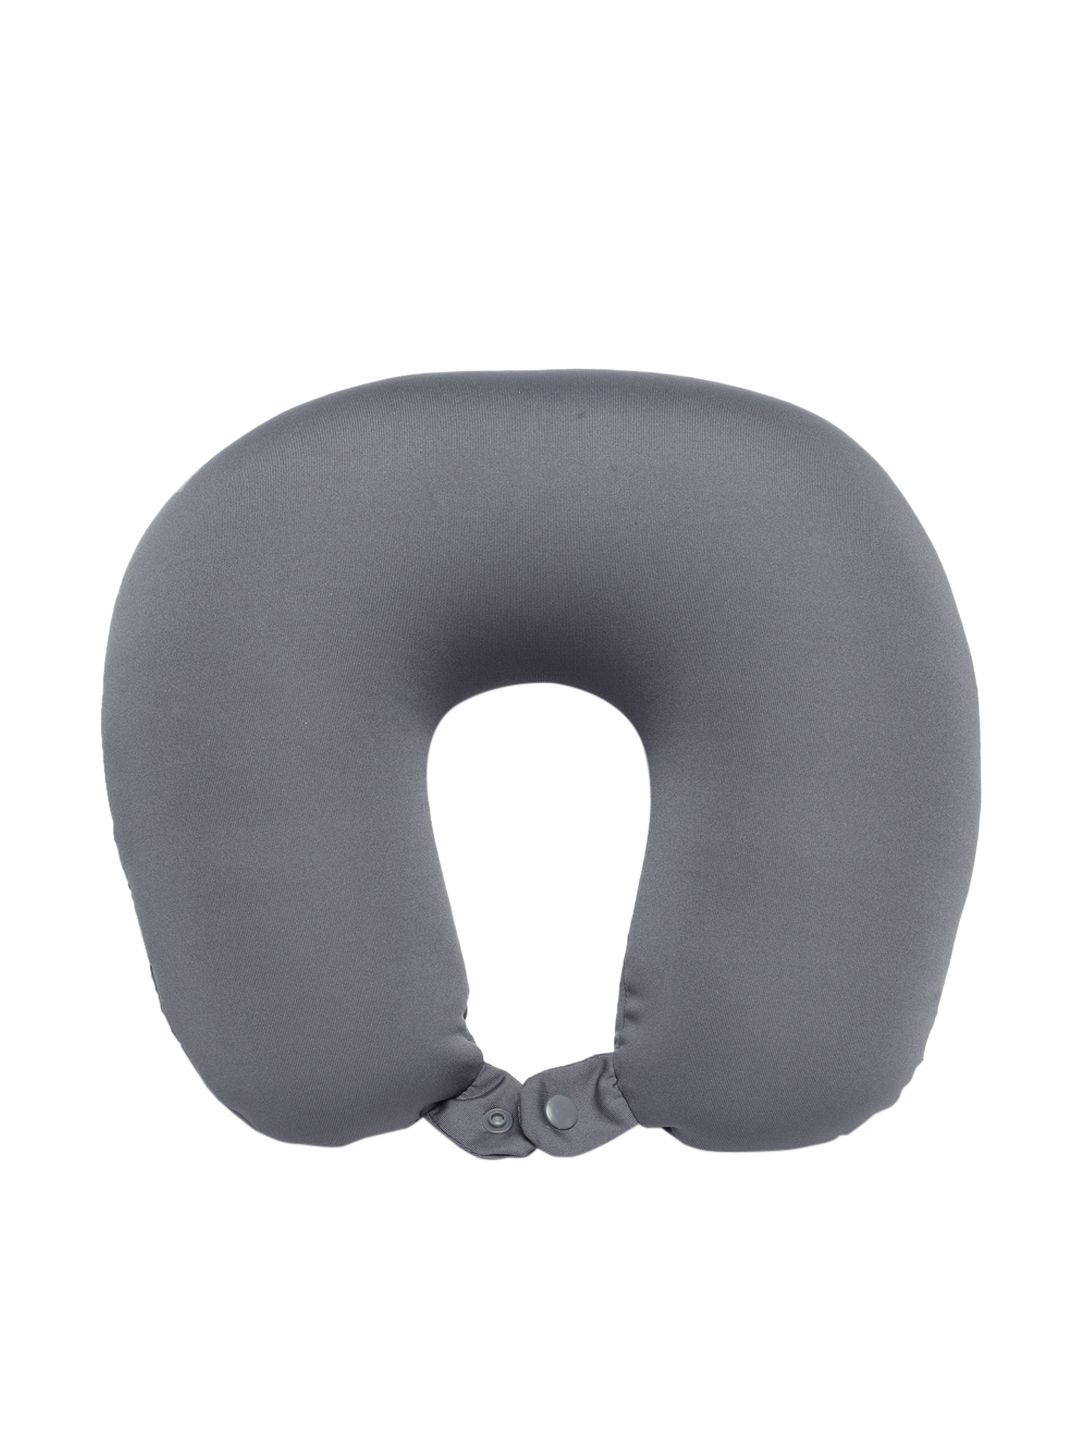 Teakwood Leathers Unisex Grey Solid Memory Foam Travel Neck Pillow Price in India